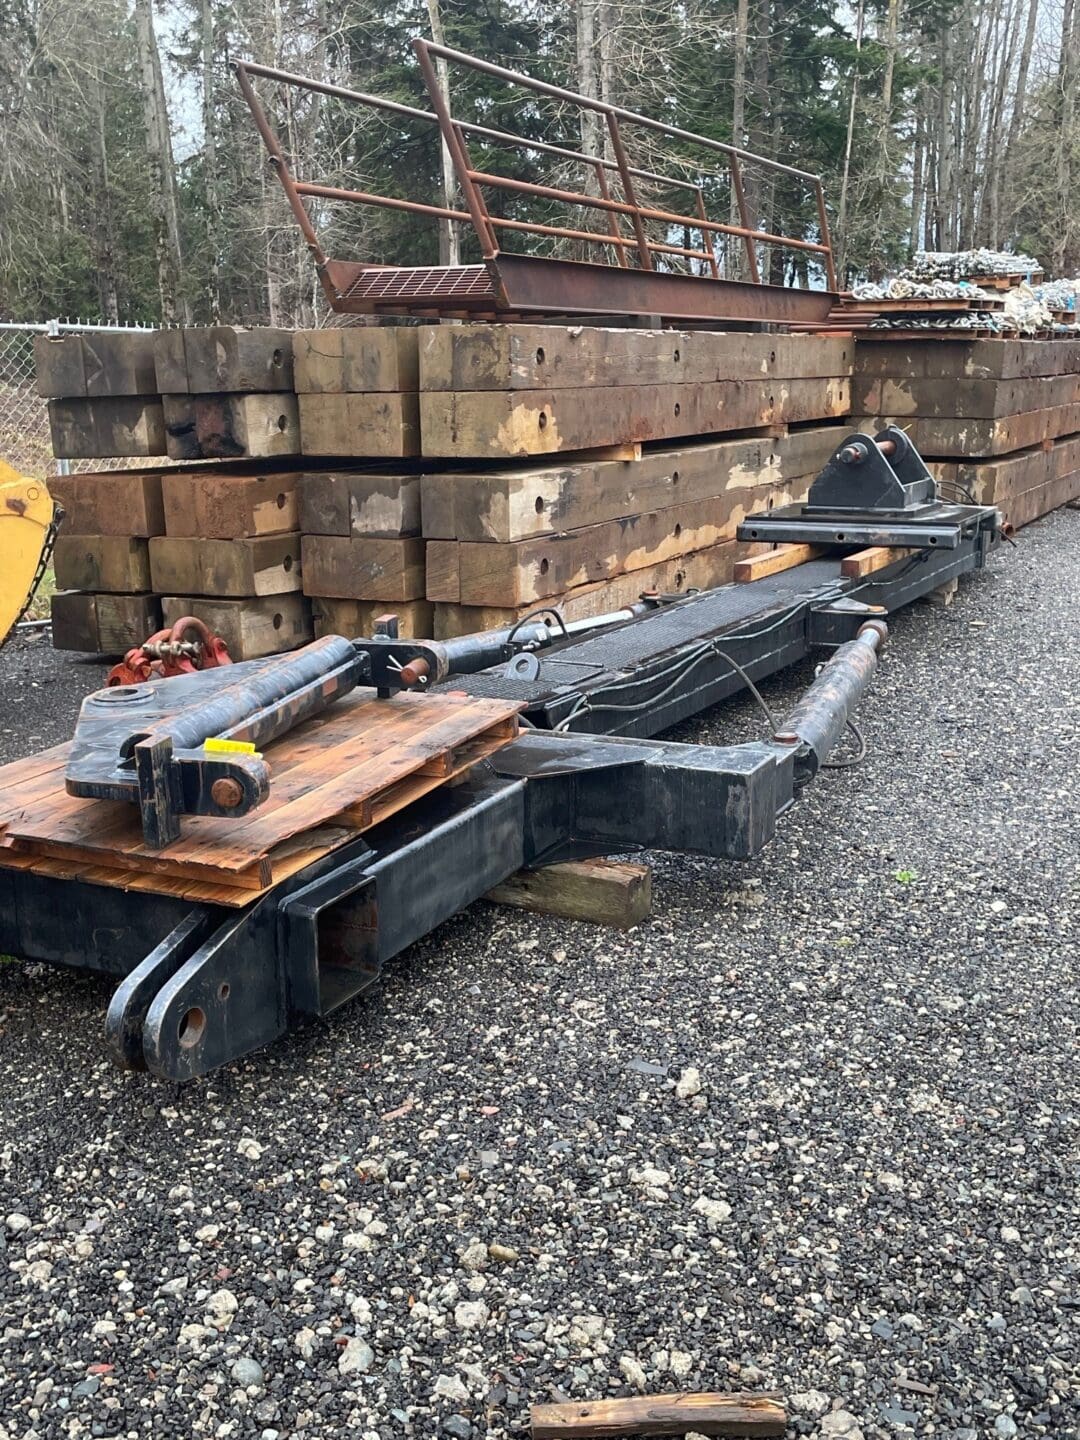 Marine Construction Equipment For Sale - Project completed -